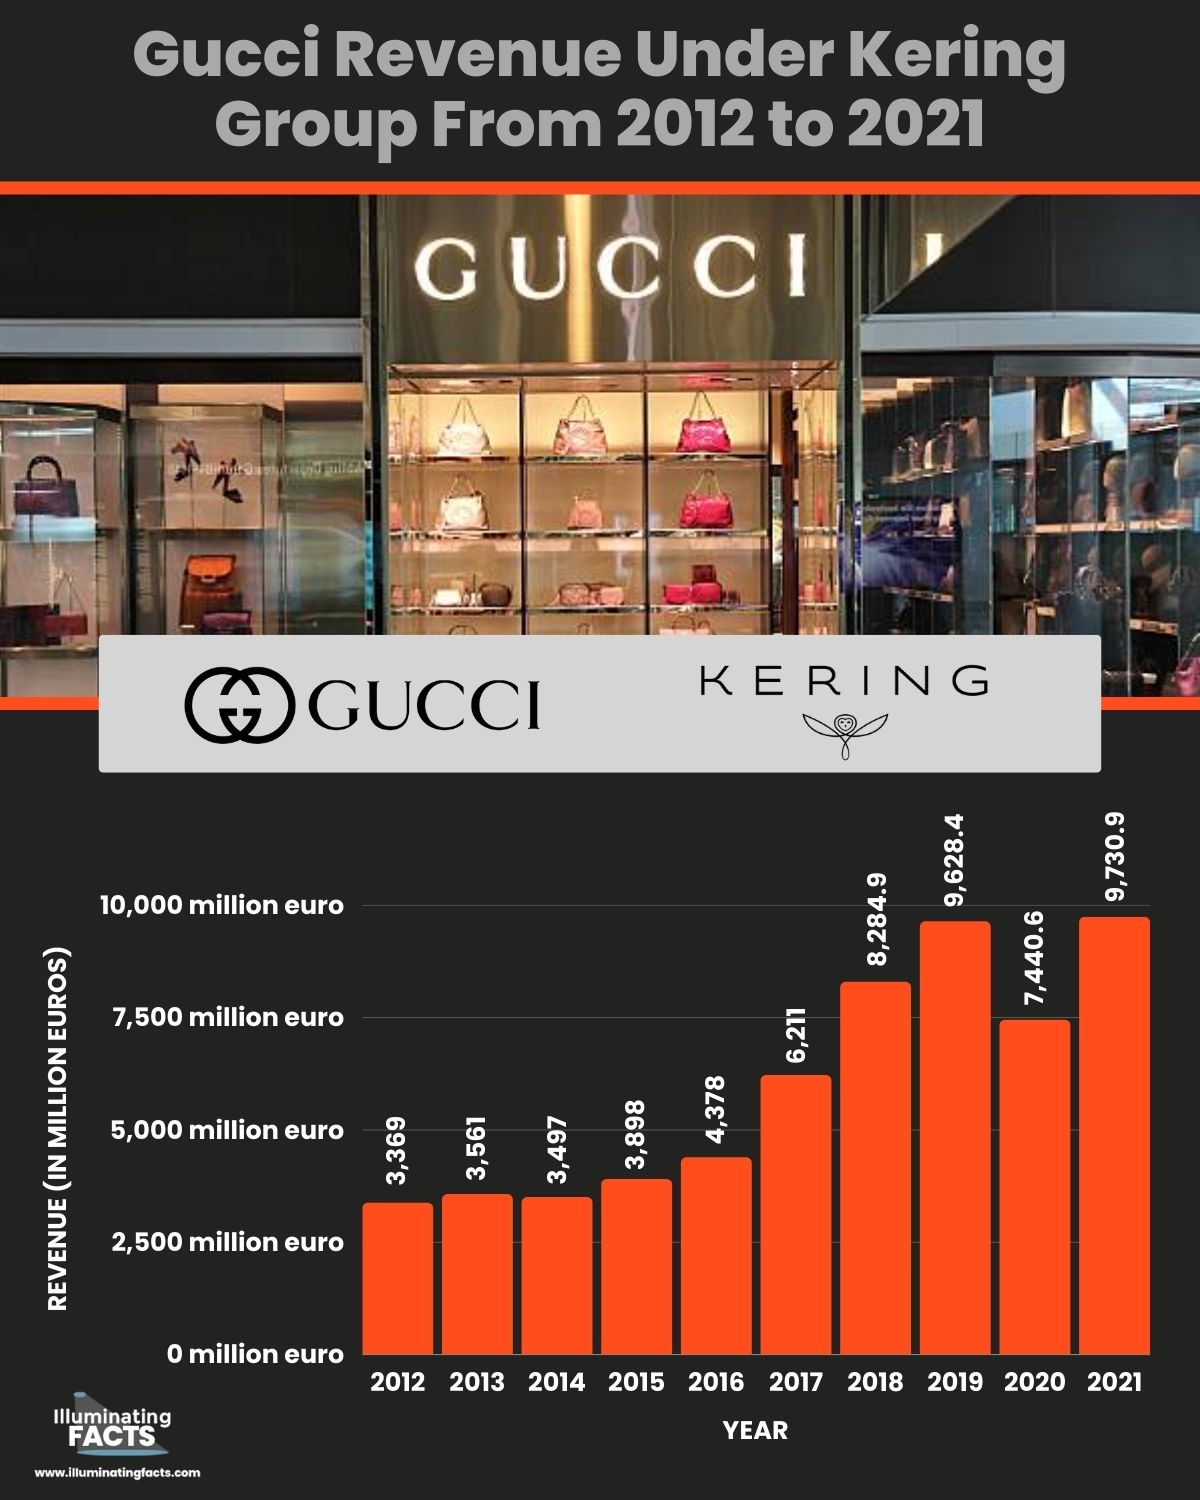 Gucci Revenue Under Kering Group From 2012 to 2021